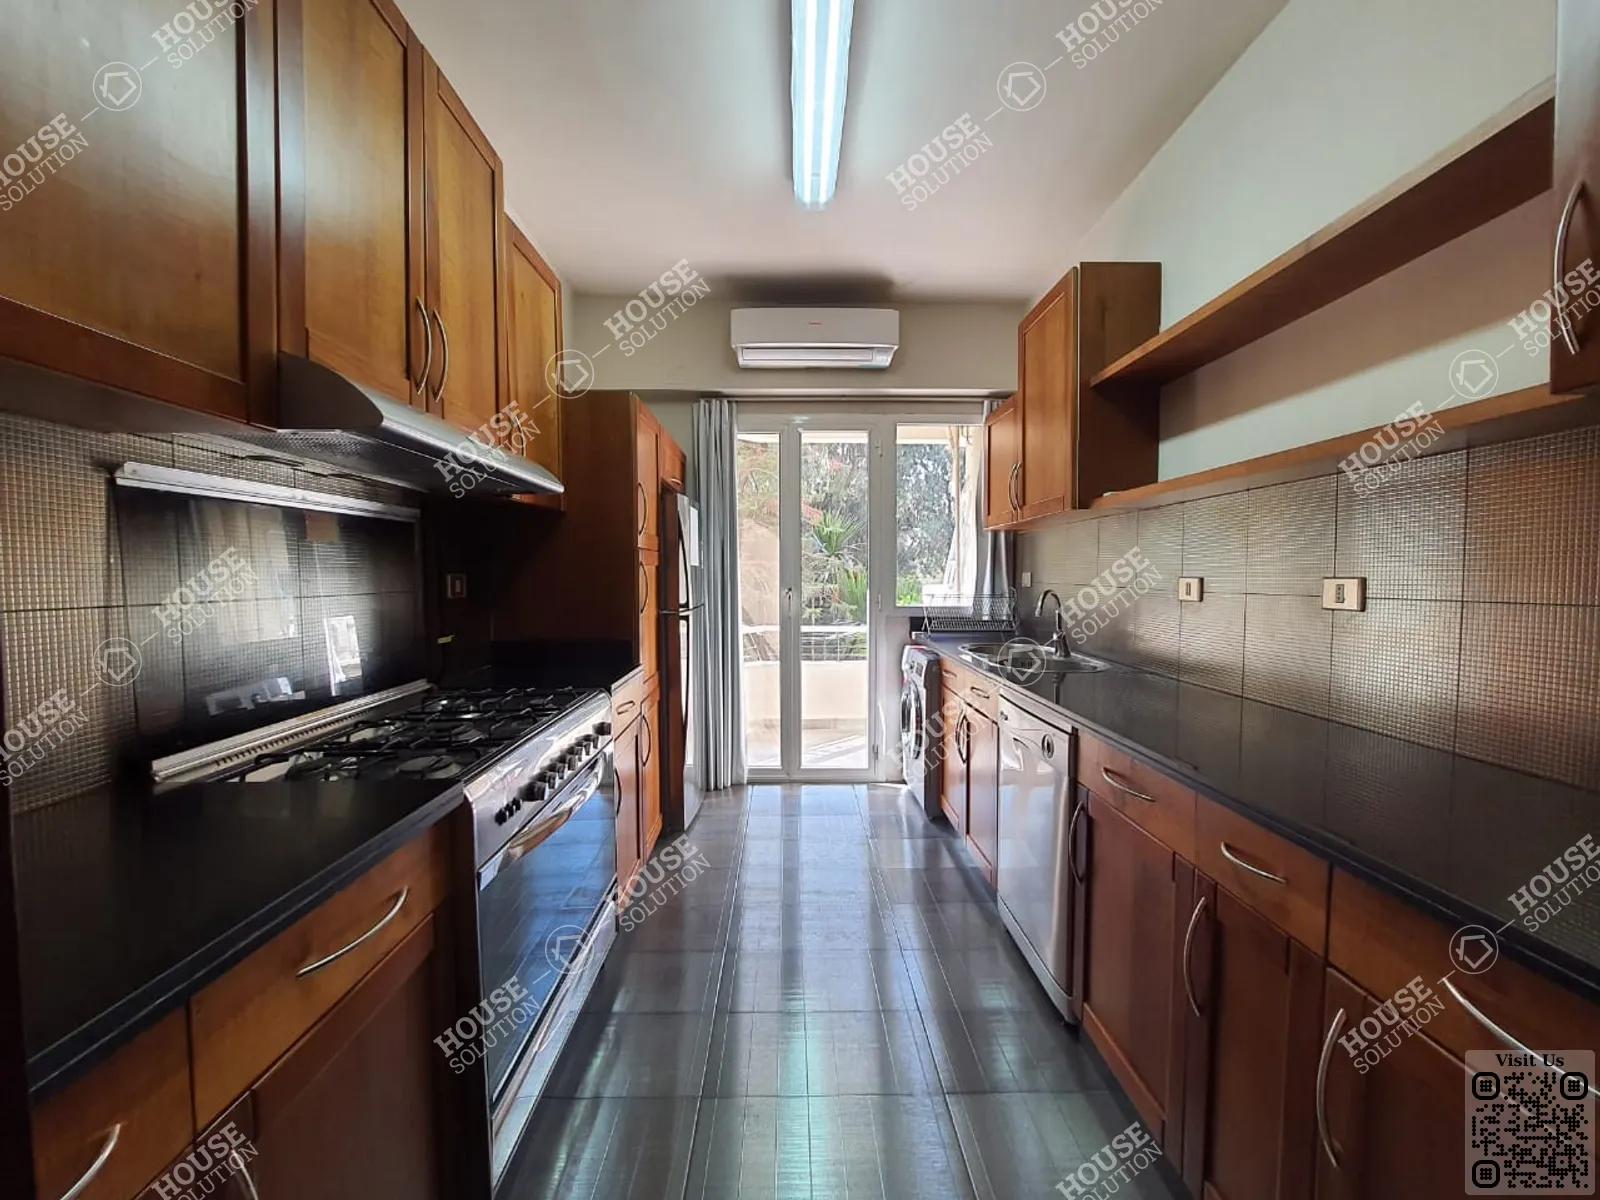 KITCHEN  @ Apartments For Rent In Maadi Maadi Sarayat Area: 180 m² consists of 3 Bedrooms 2 Bathrooms Modern furnished 5 stars #4740-2